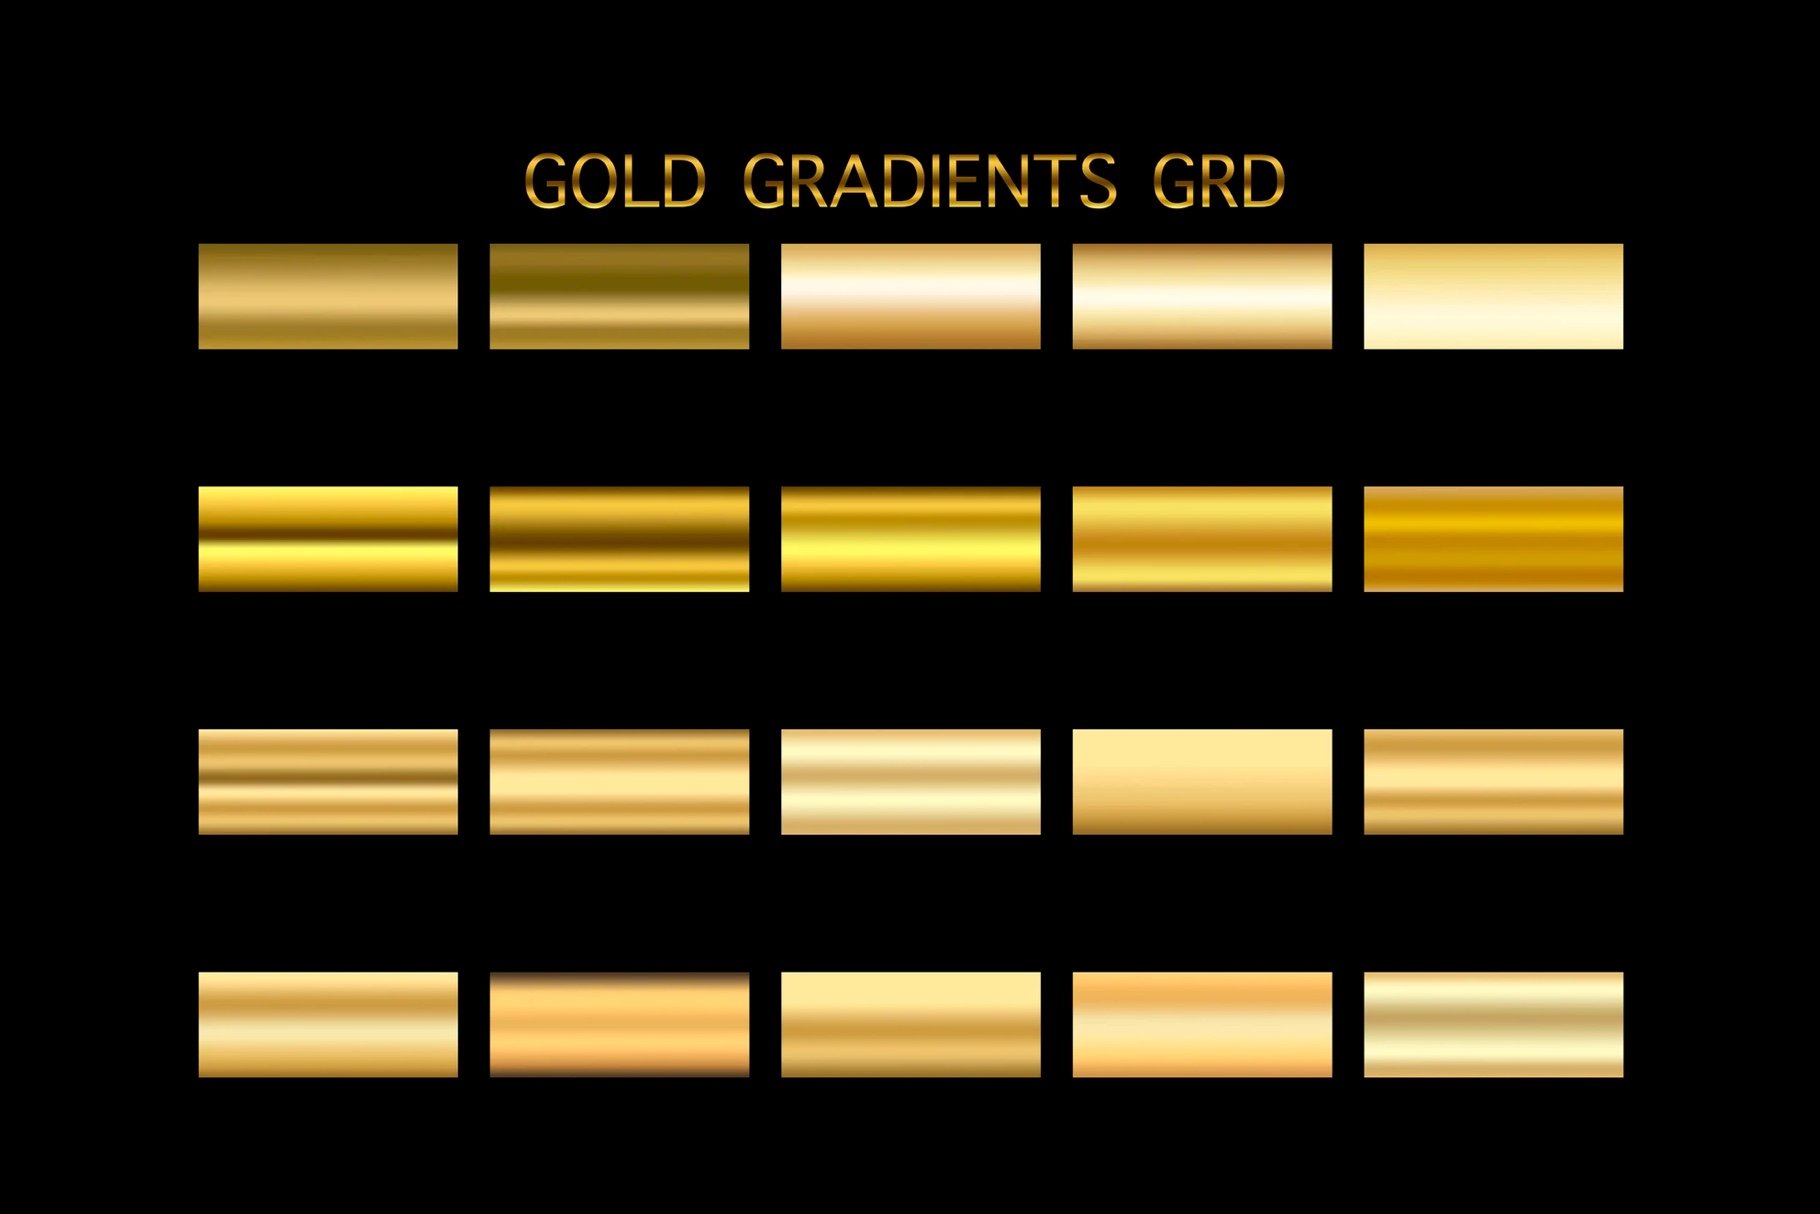 Photoshop gold gradientscover image.